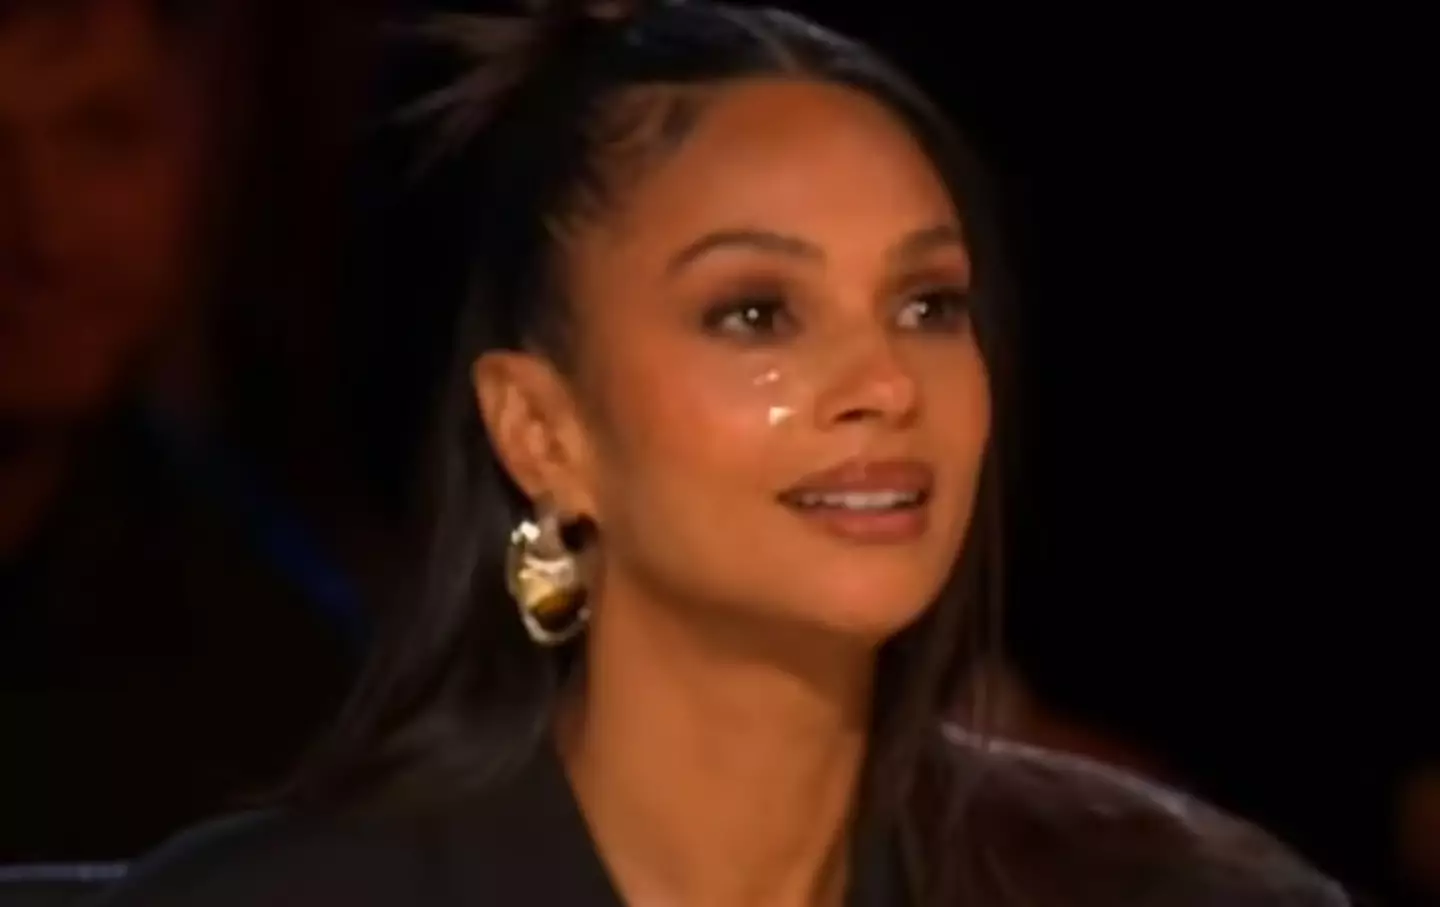 Alesha Dixon was particularly moved by the performance.